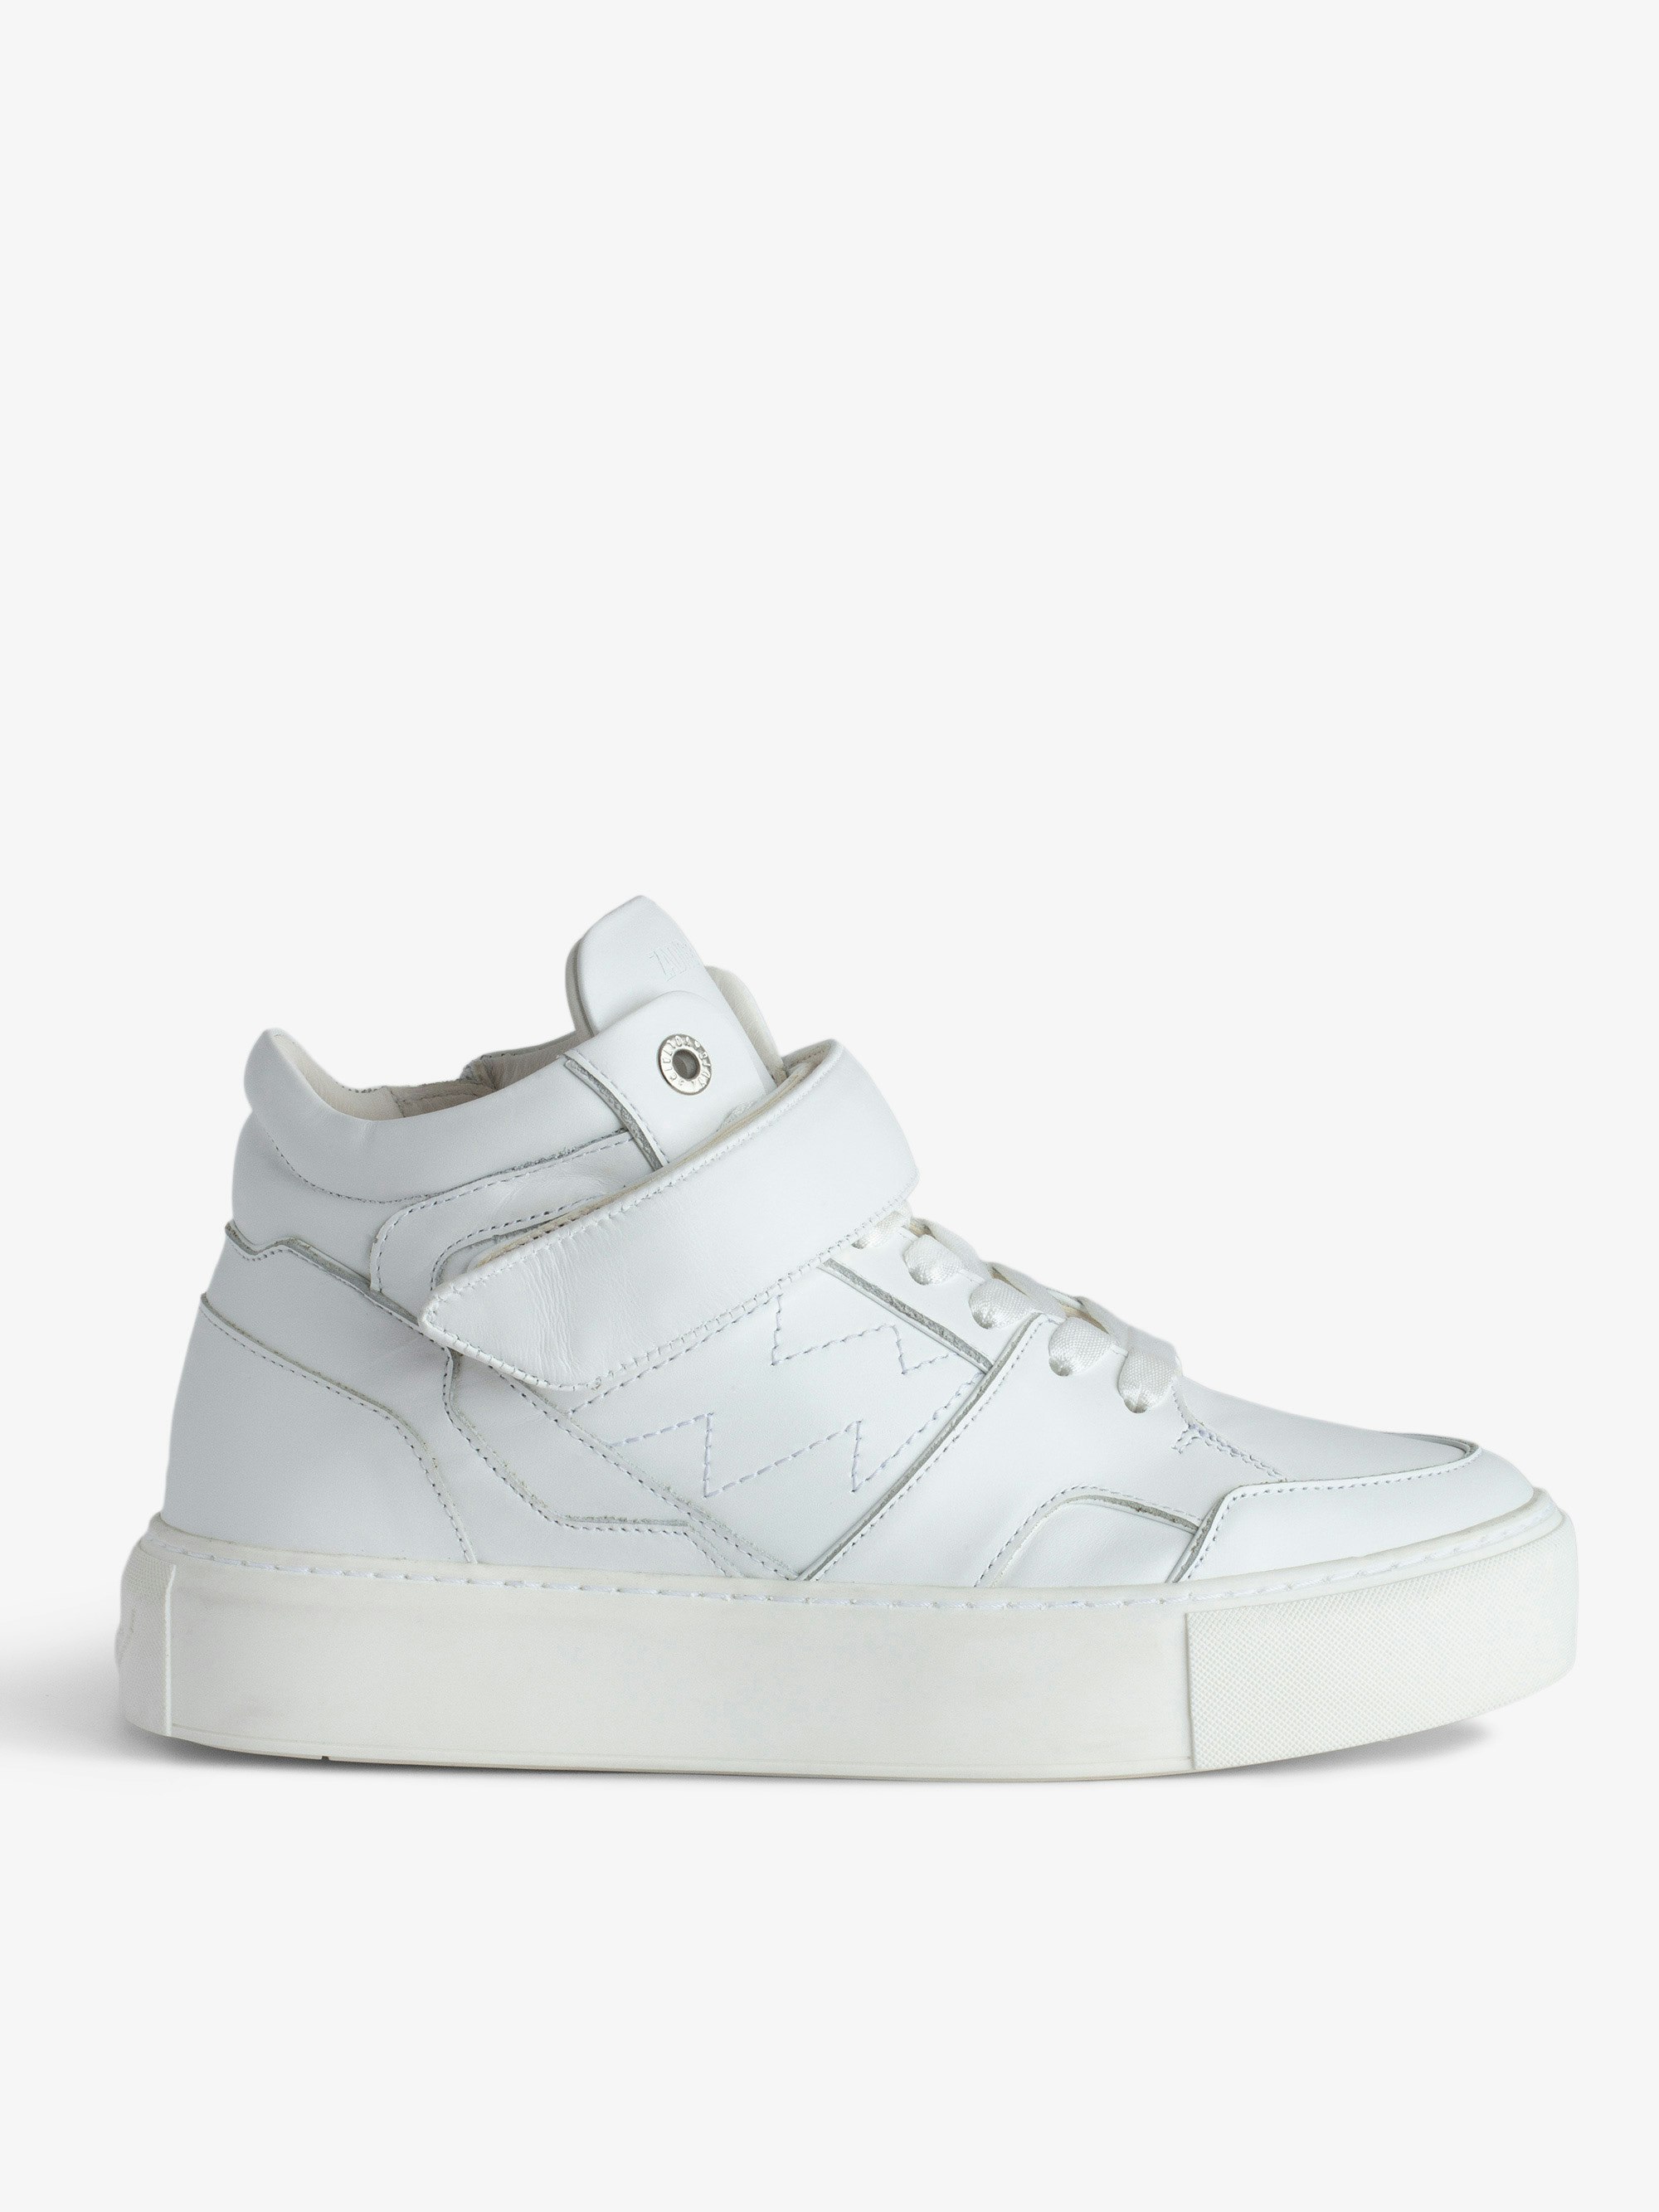 ZV1747 Flash Chunky Mid-Top Sneakers - Women’s white smooth leather mid-top trainers with Velcro fastening, lightning bolt panels and chunky sole.